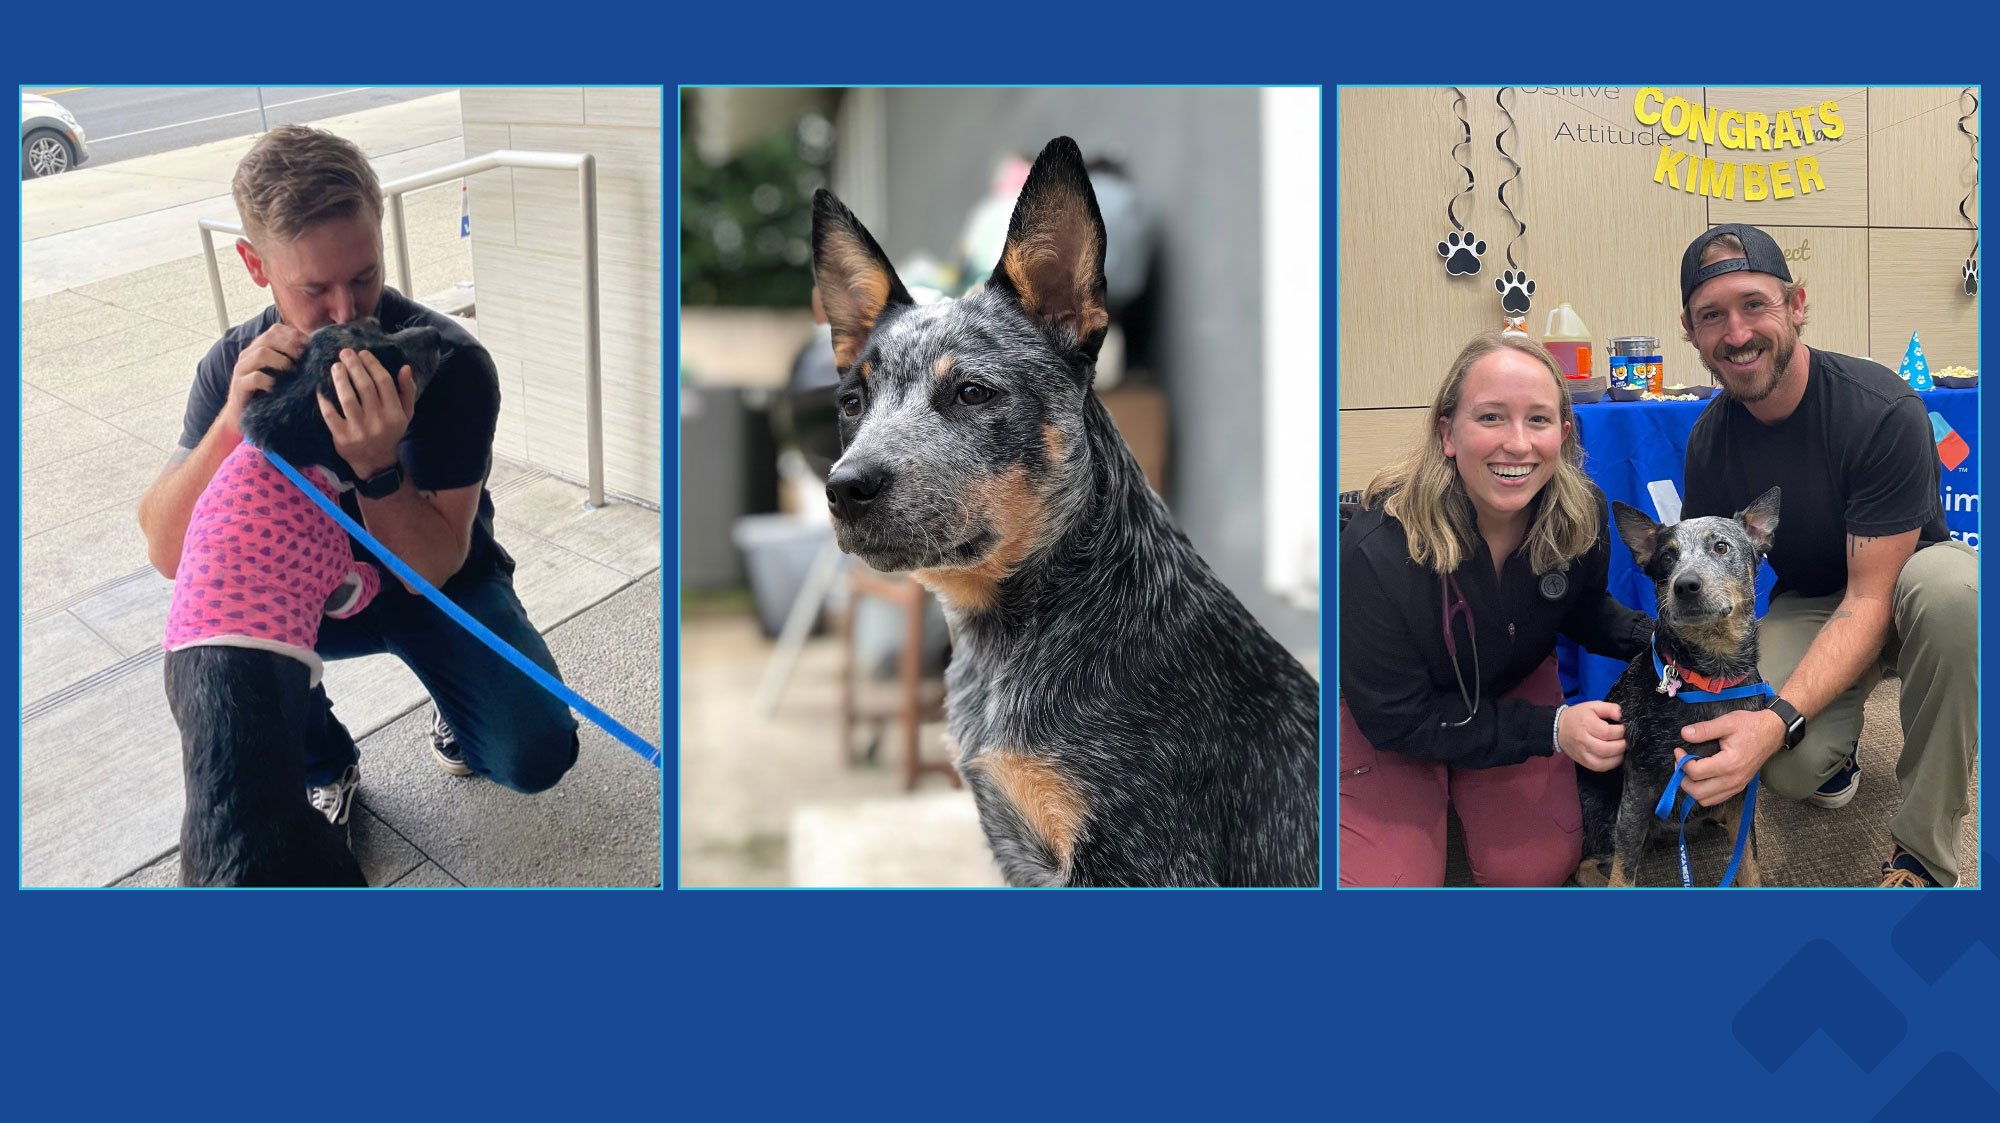 Three images of blue heeler dog after surgery, sitting in profile view, and sitting with veterinarian and owner.